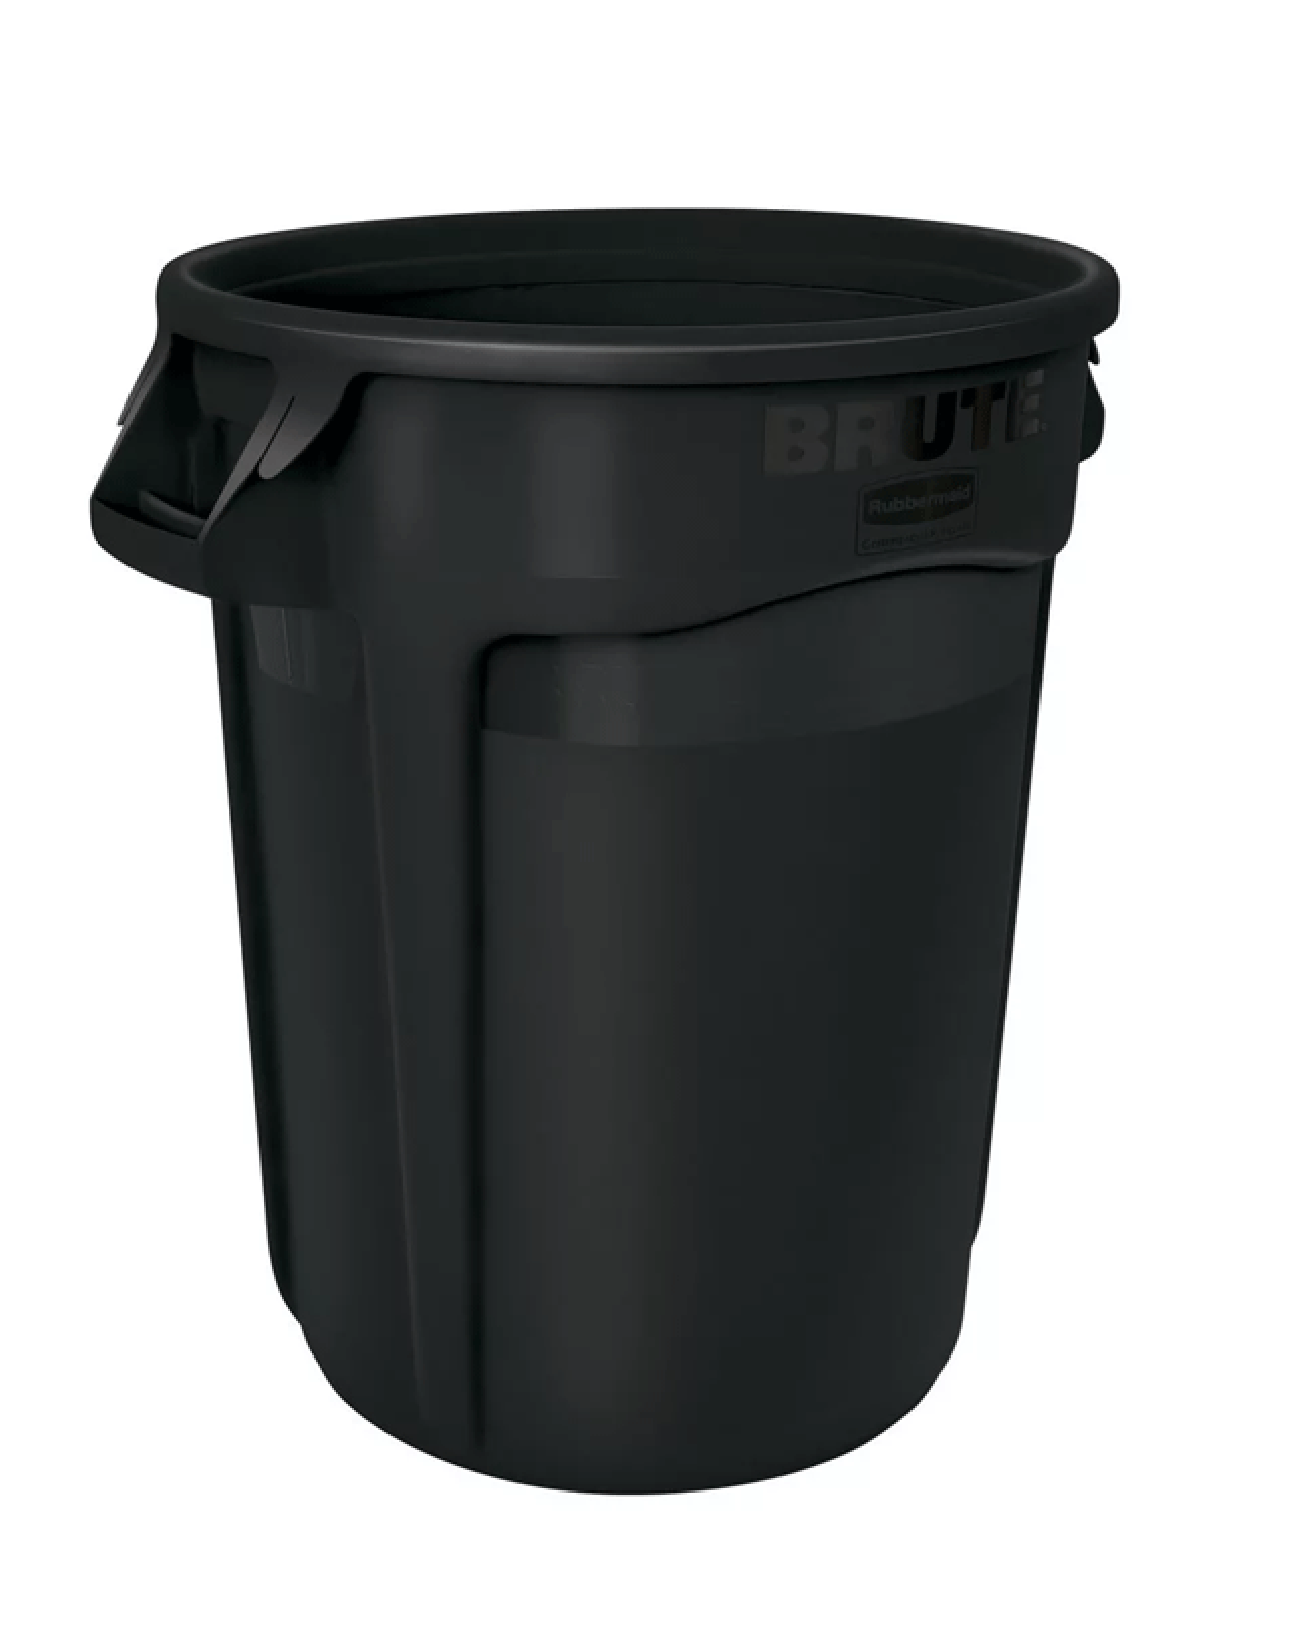 32 GAL BRUTE CONTAINER (TOP DIAMETER: 22"X HEIGHT: 22 3/16")